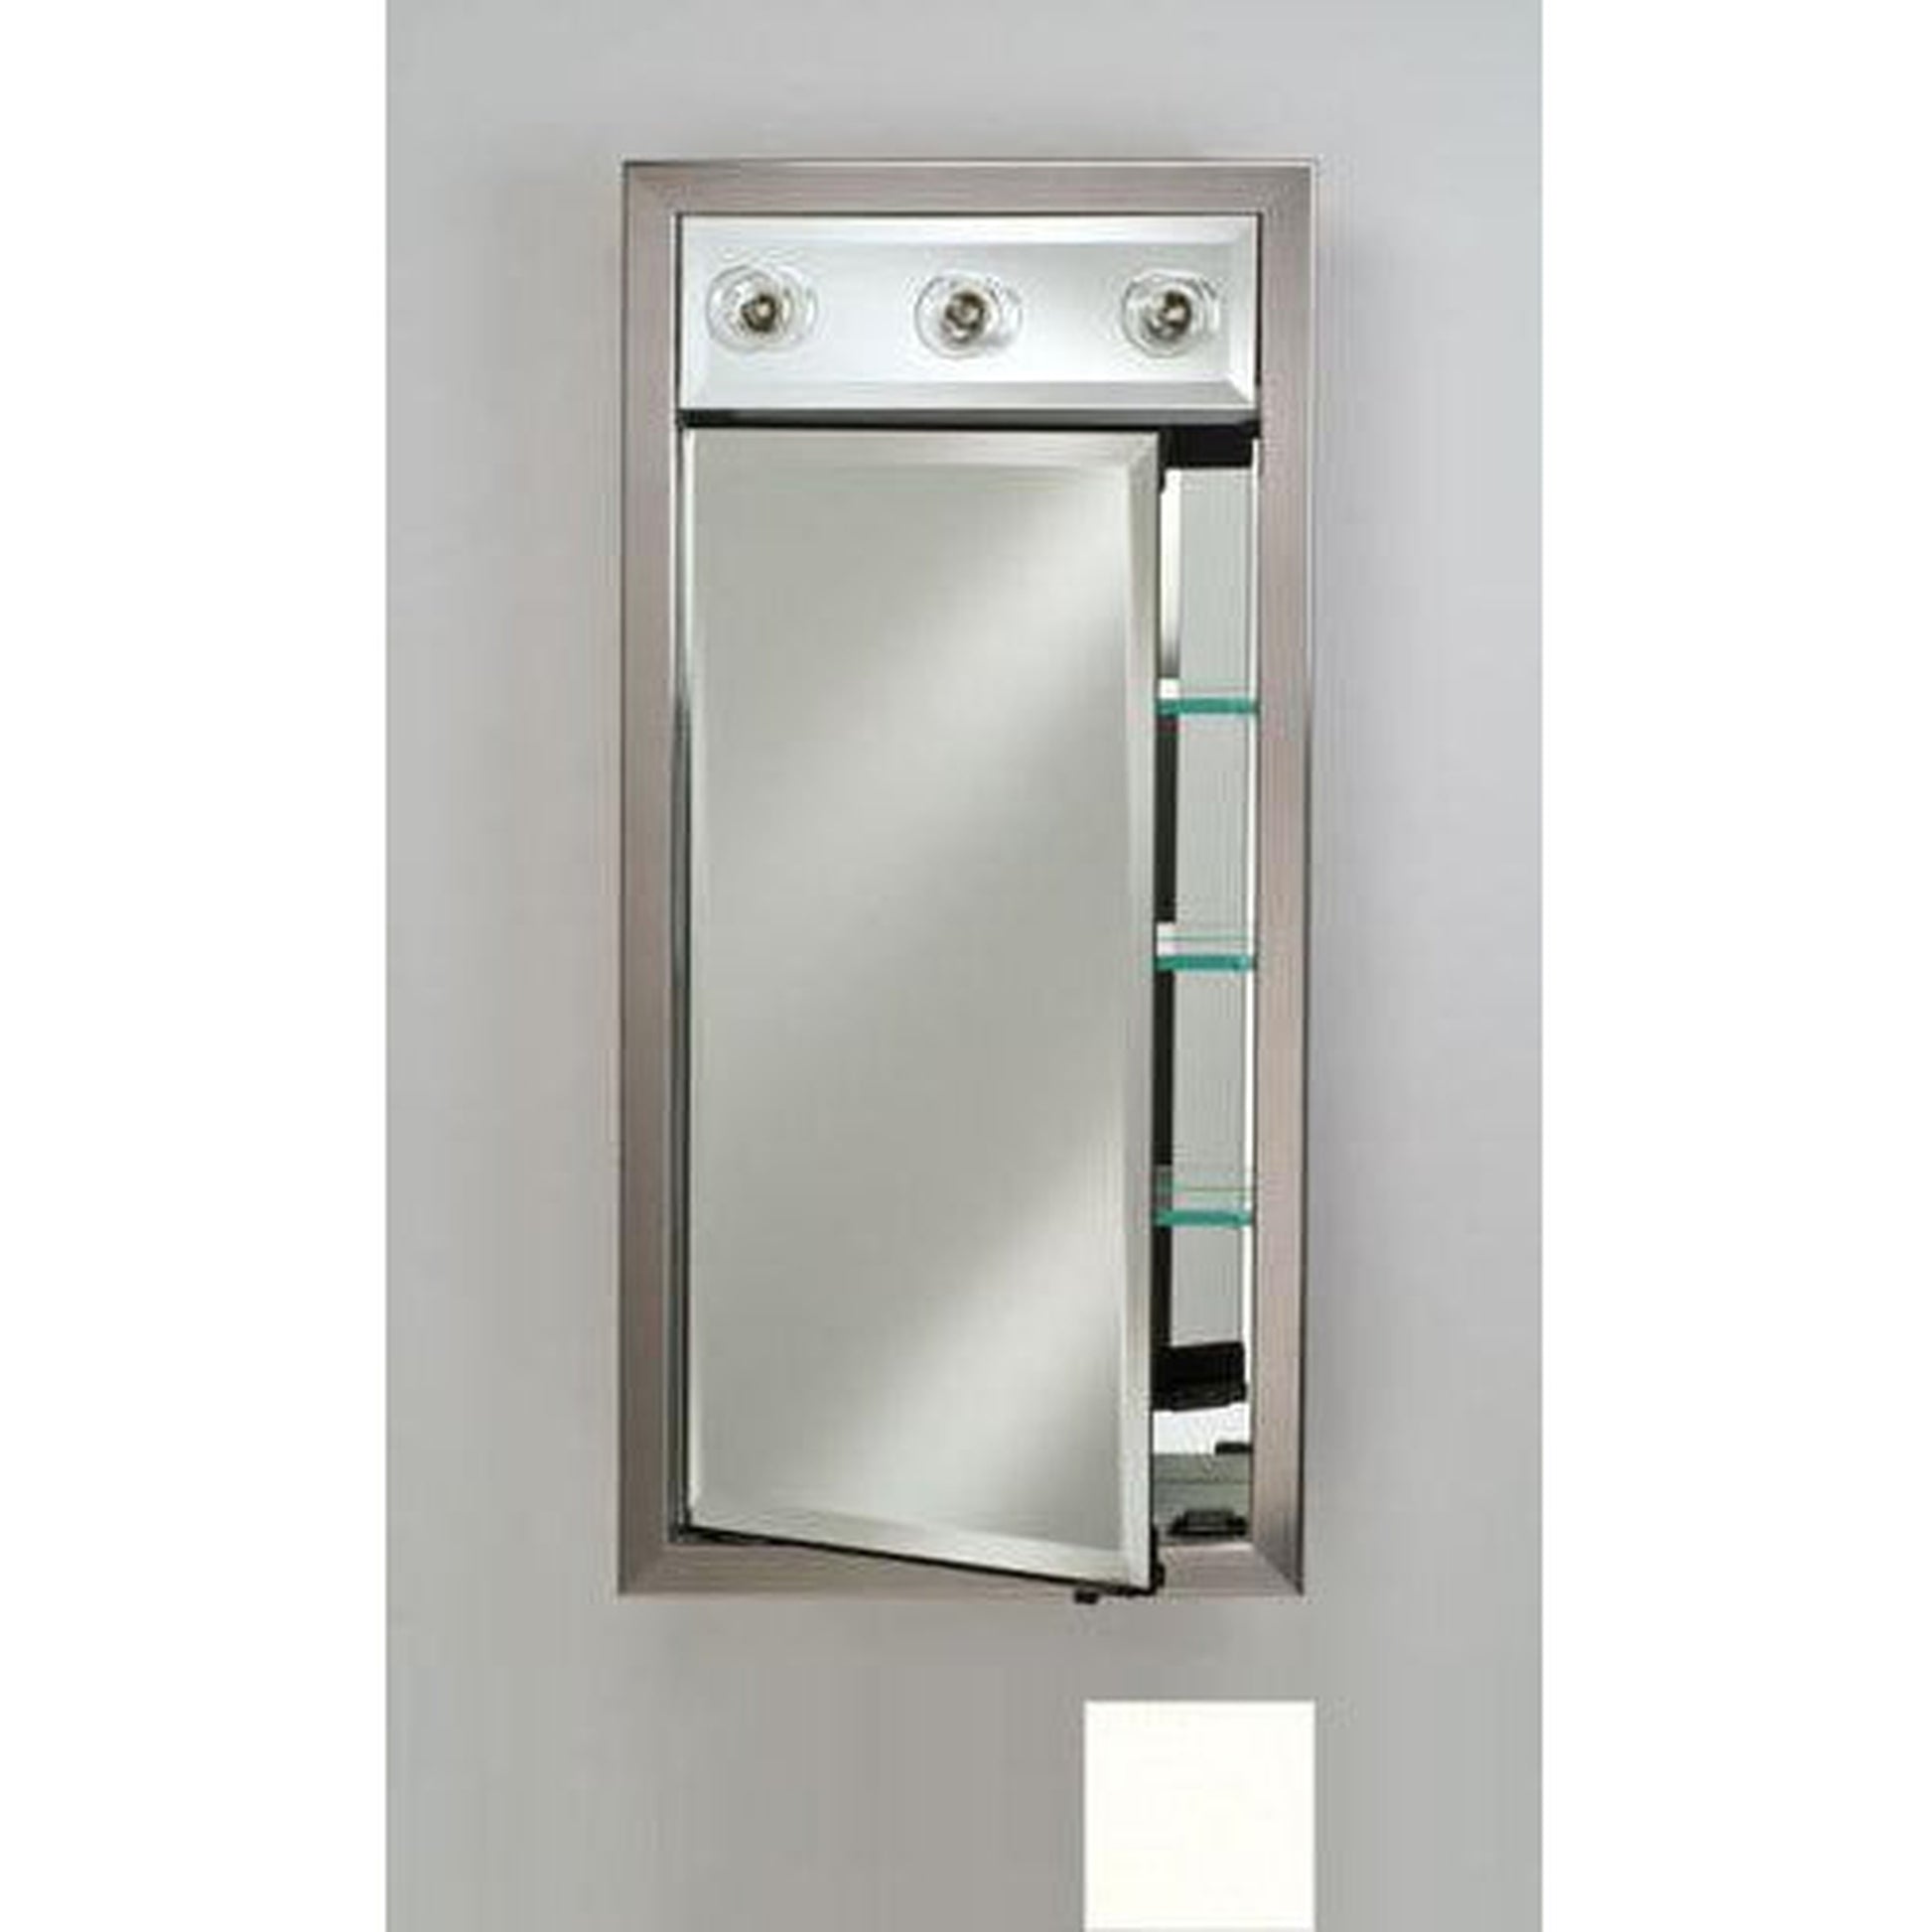 Afina Signature 17" x 30" Colorgrain White Recessed Left Hinged Single Door Medicine Cabinet With Contemporary Lights